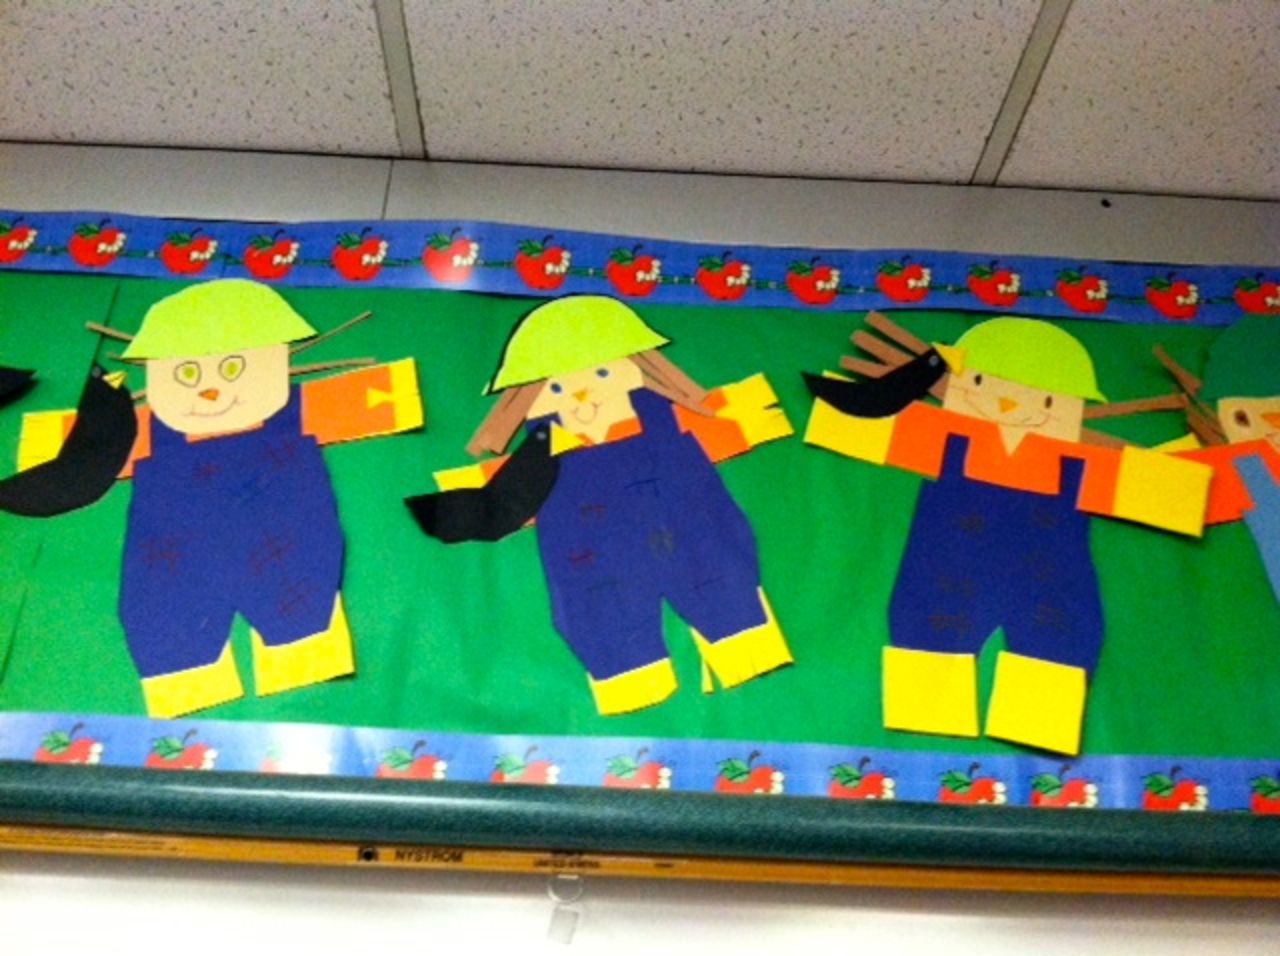 C.J. made a long-haired version of himself -- the paper farmer in the middle -- during "Going To The Farm" week in kindergarten.